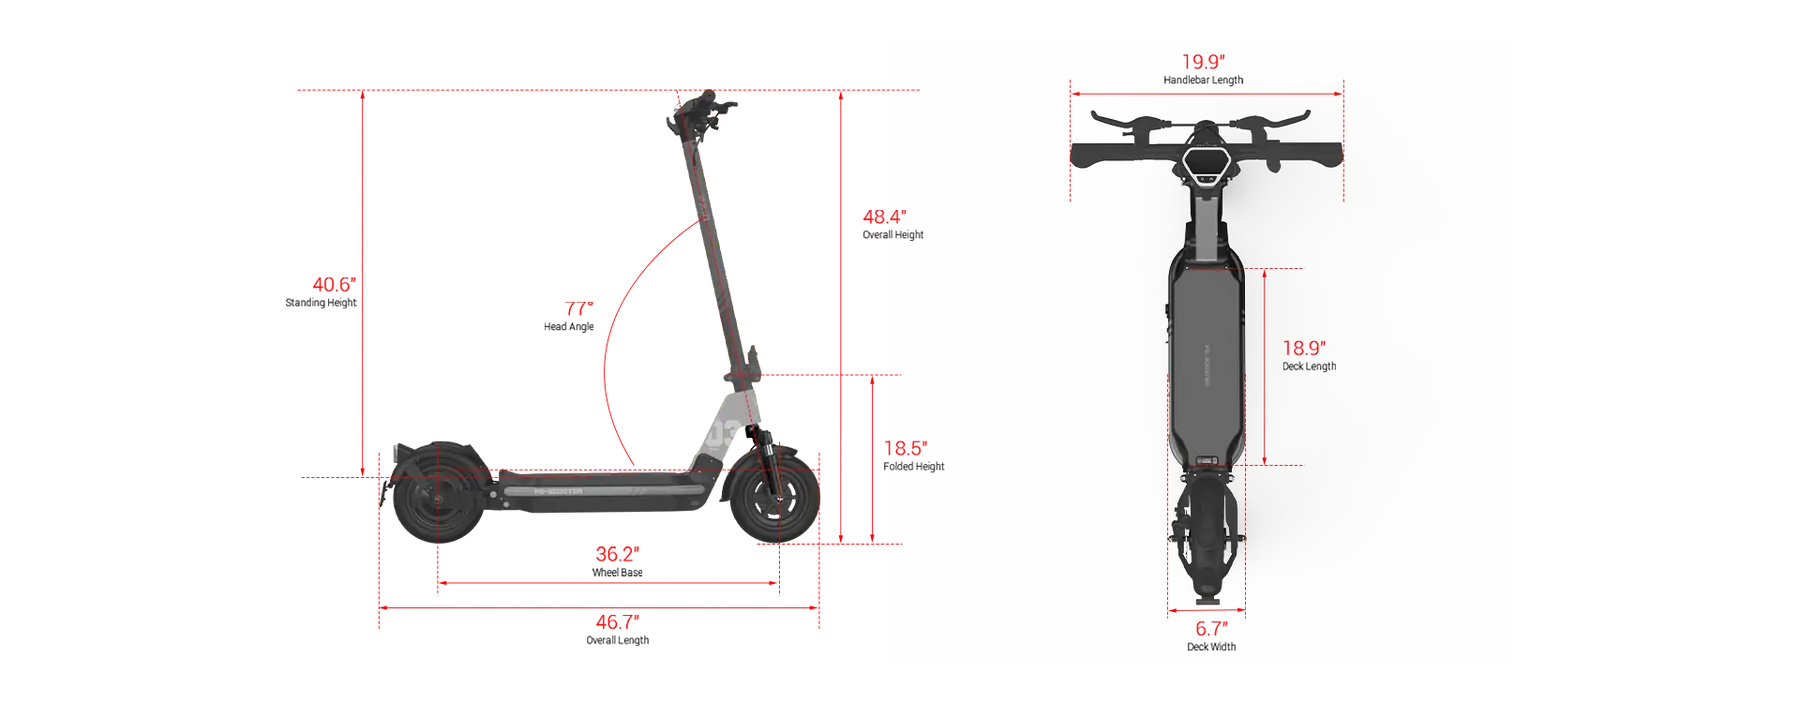 PXID-Size of P3 electric scooter